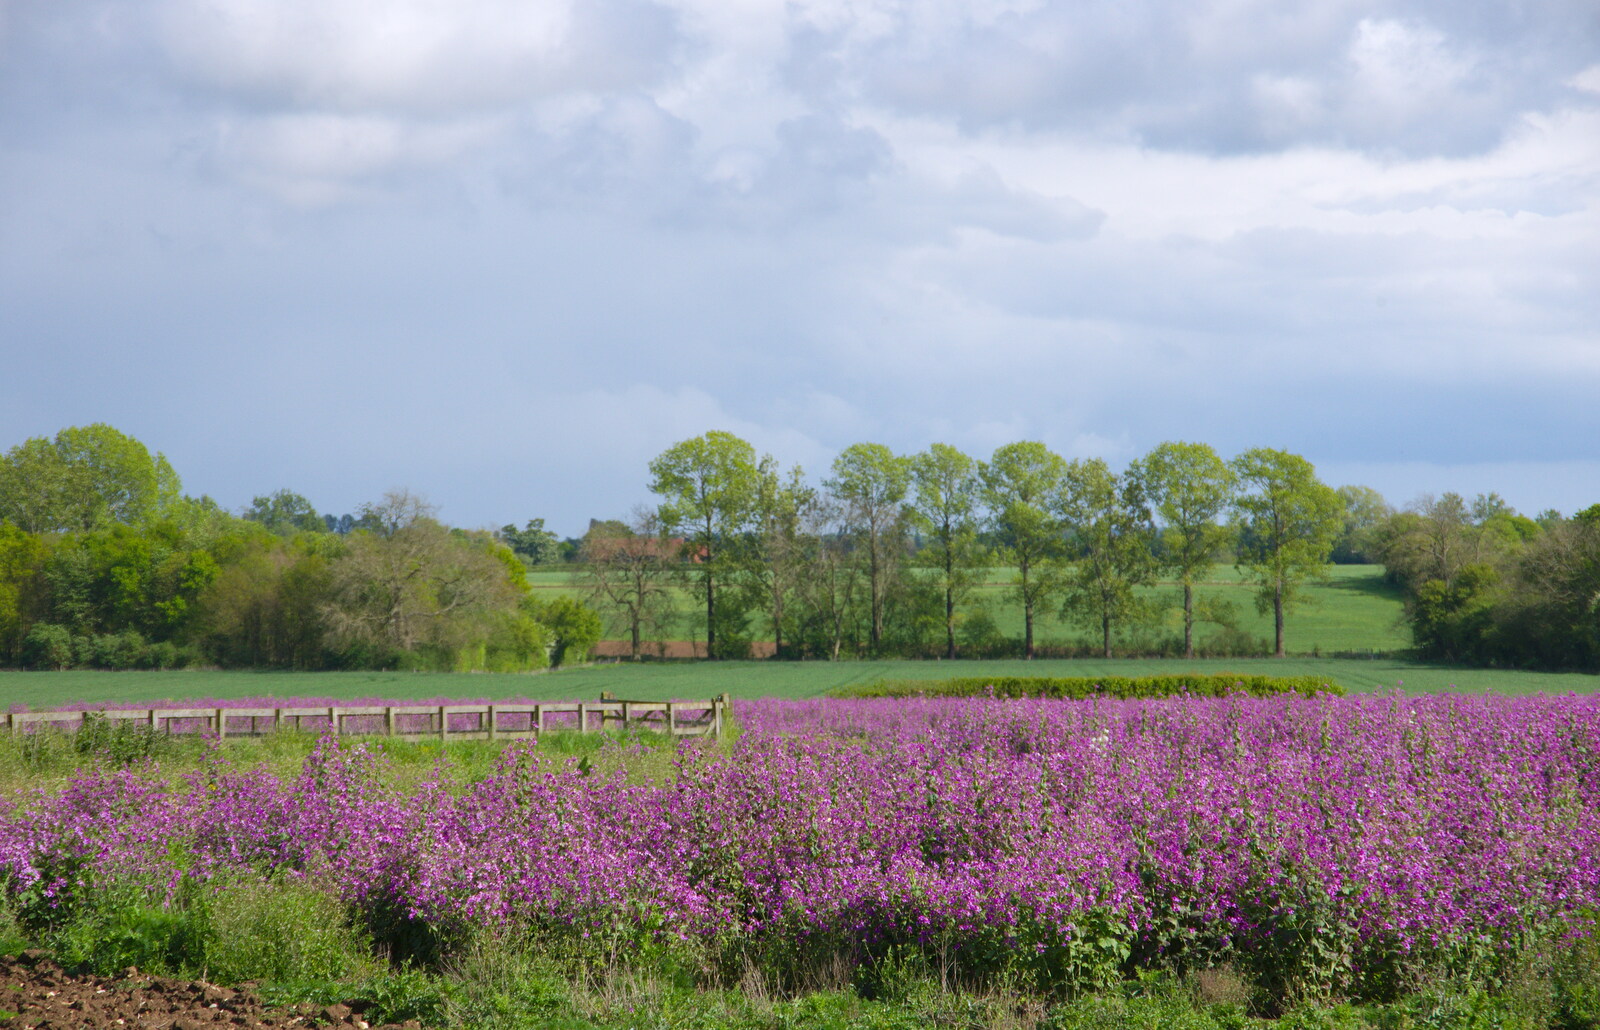 A nice field of purple from The BSCC Bike Ride 2019, Coggeshall, Essex - 11th May 2019